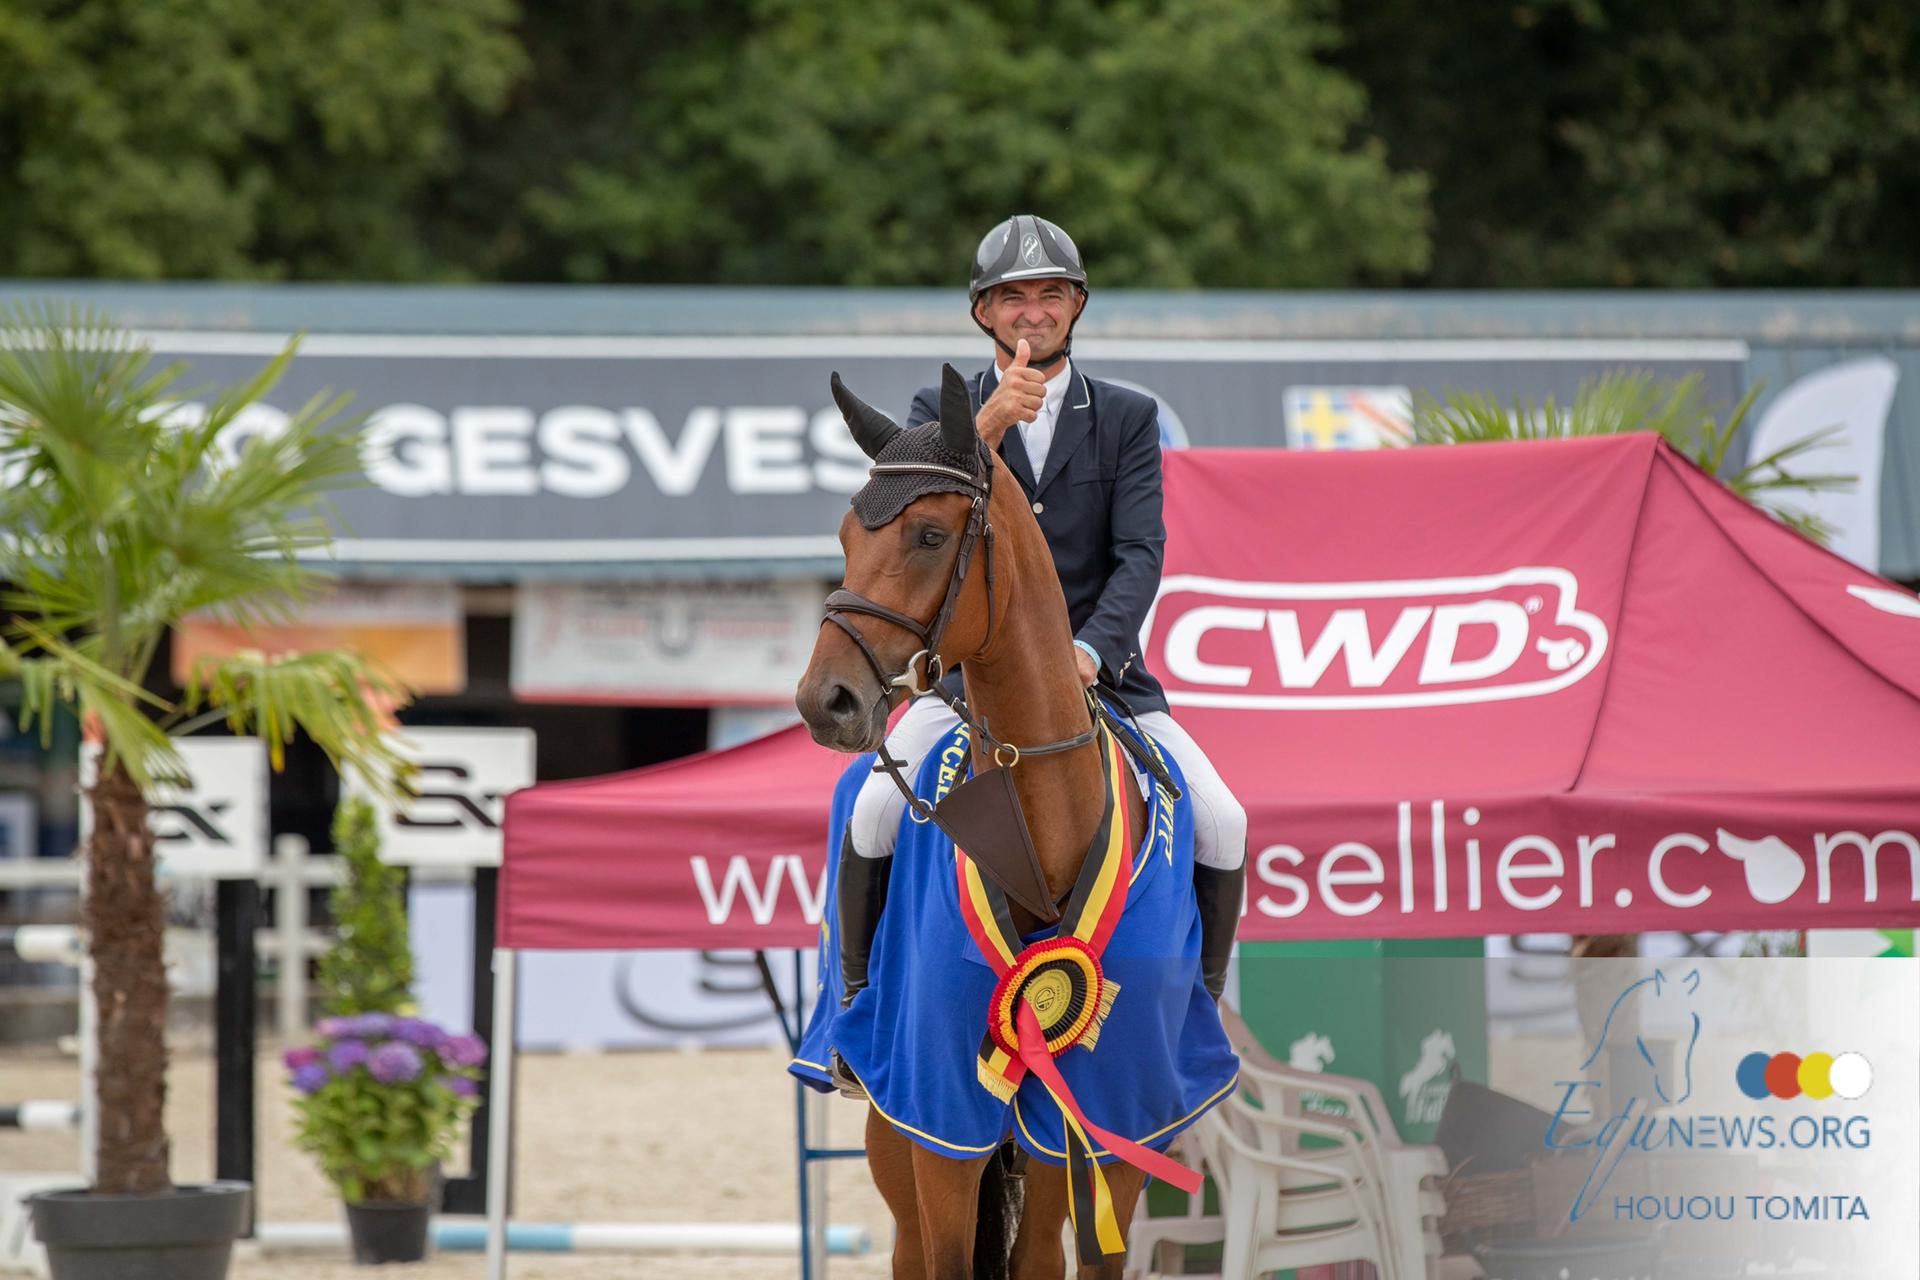 Walter Lelie keeps the victory in Belgium with Qalista DN in World Championship for 6YO